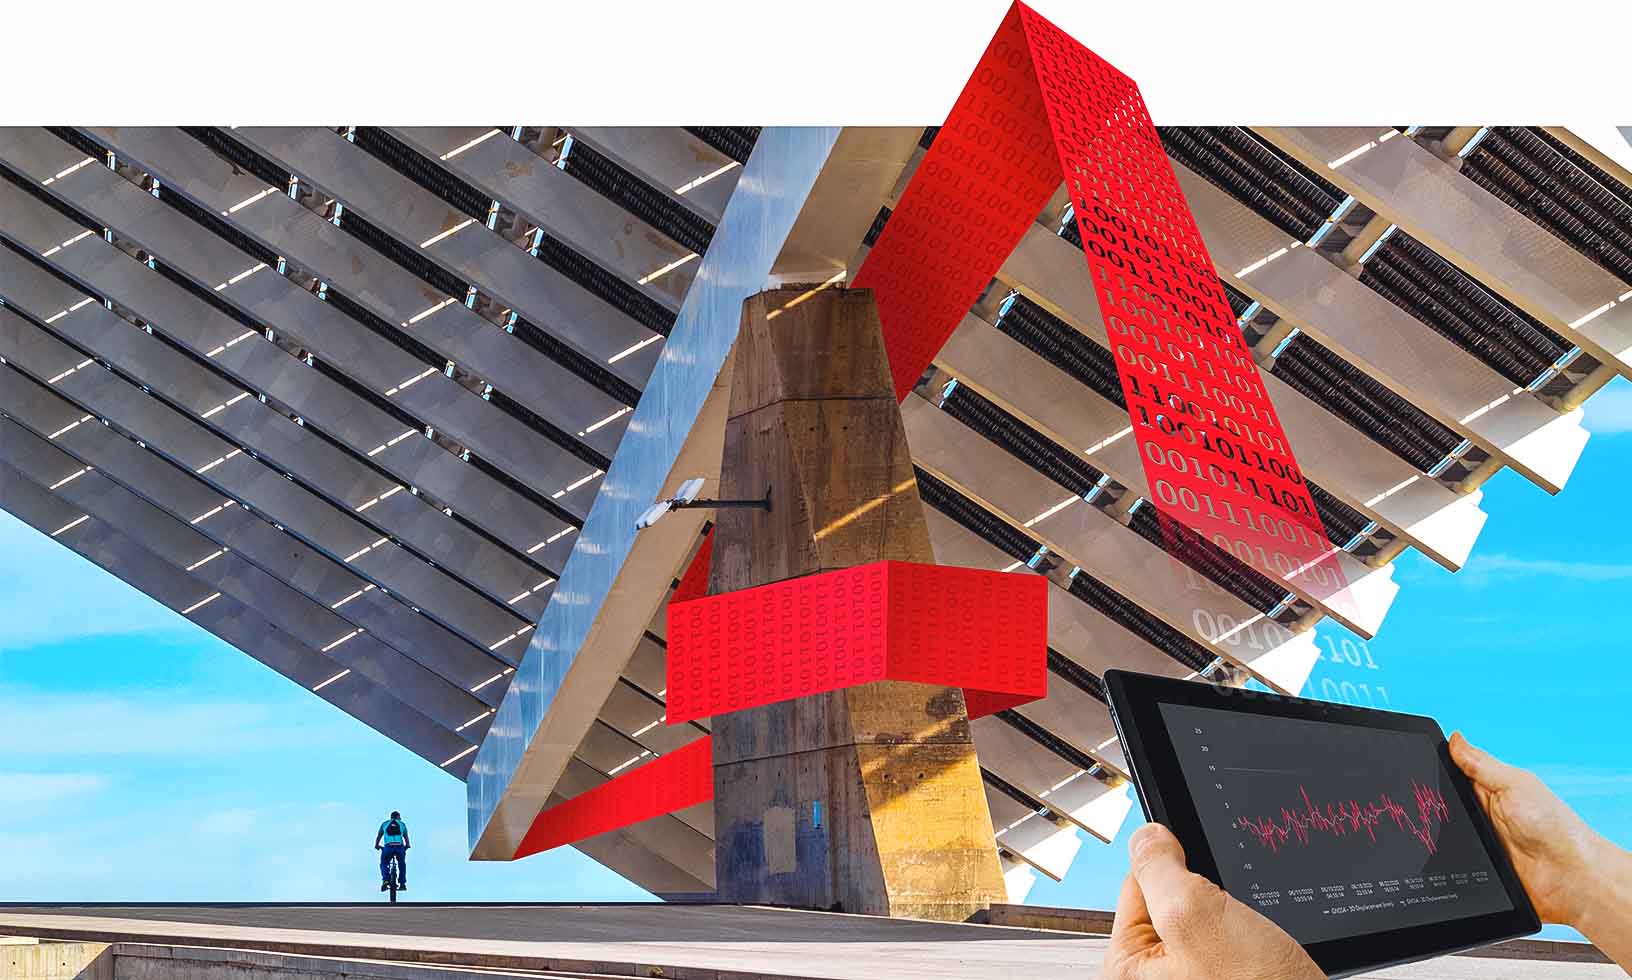 monitoring data from a large structure displayed on a tablet running Leica GeoMoS Edge software